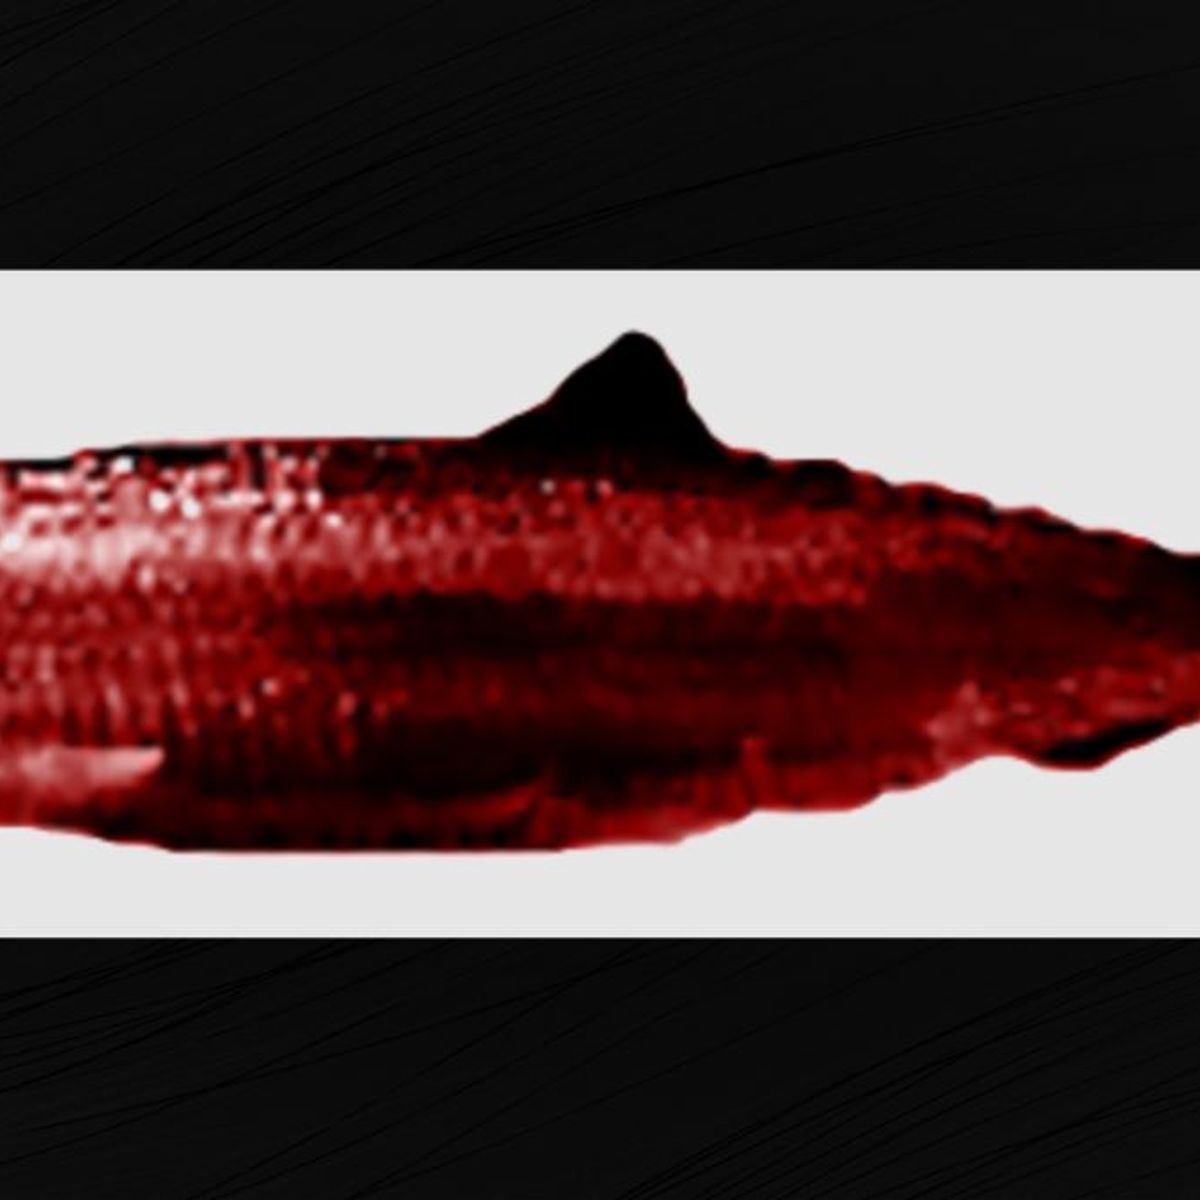 Snopestionary: The 'Red Herring' Logical Fallacy 